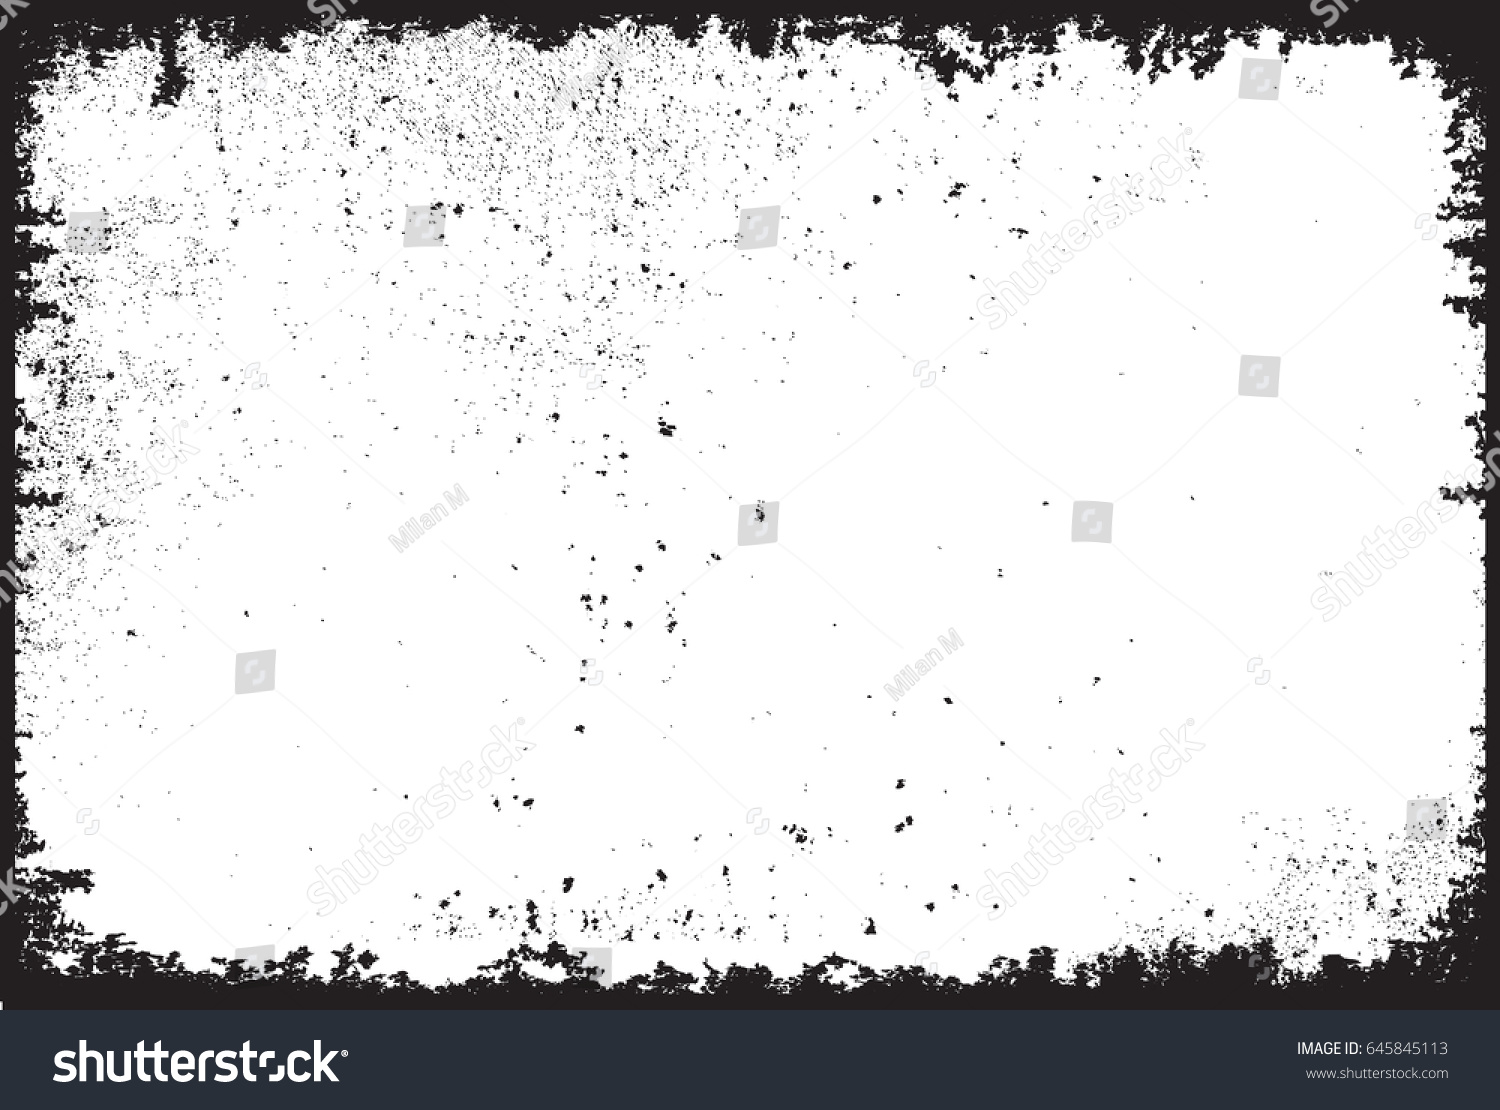 Grunge frame.Grunge background.Abstract vector template. #645845113